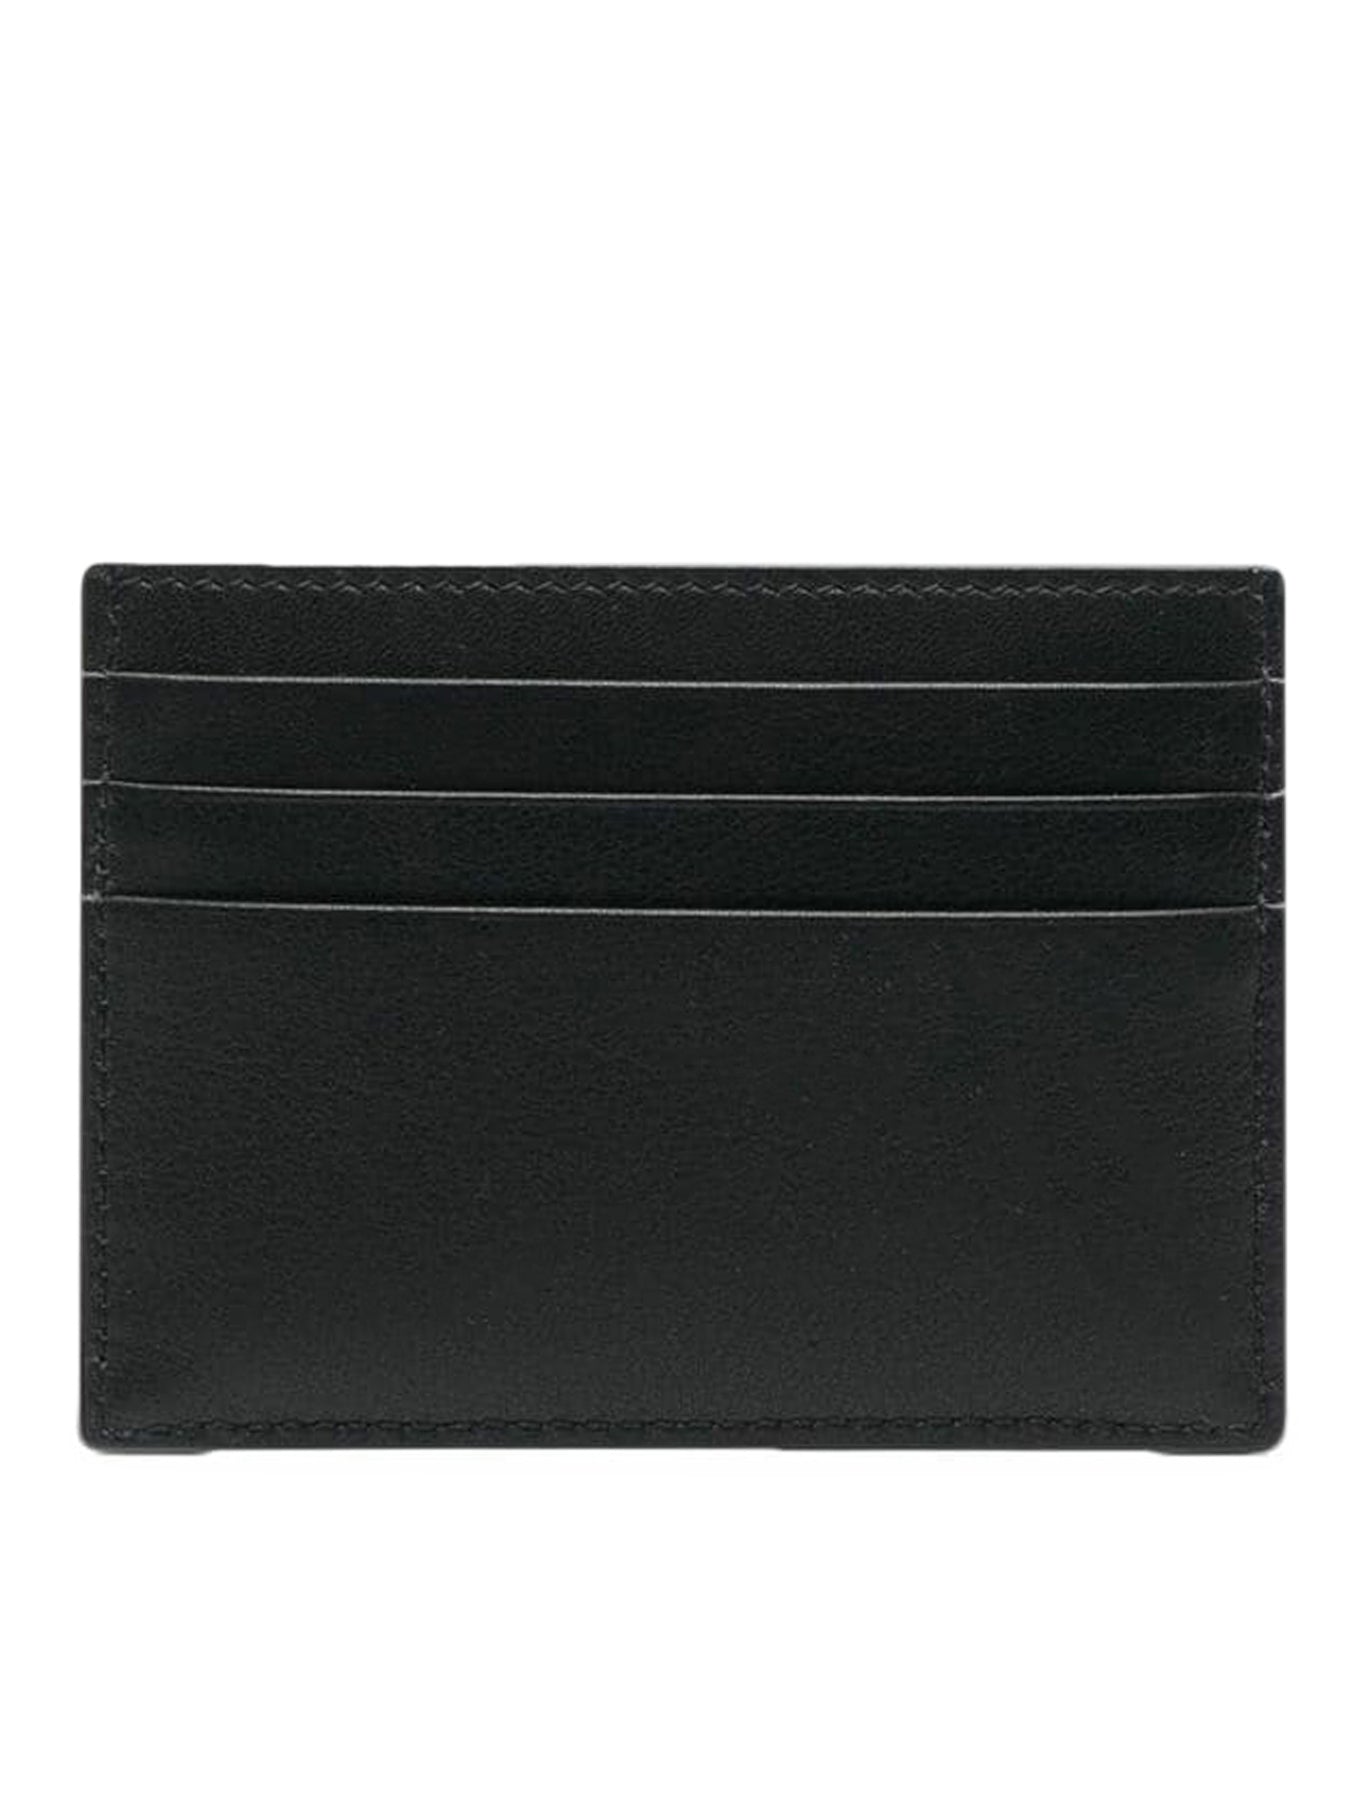 The Harness cardholder